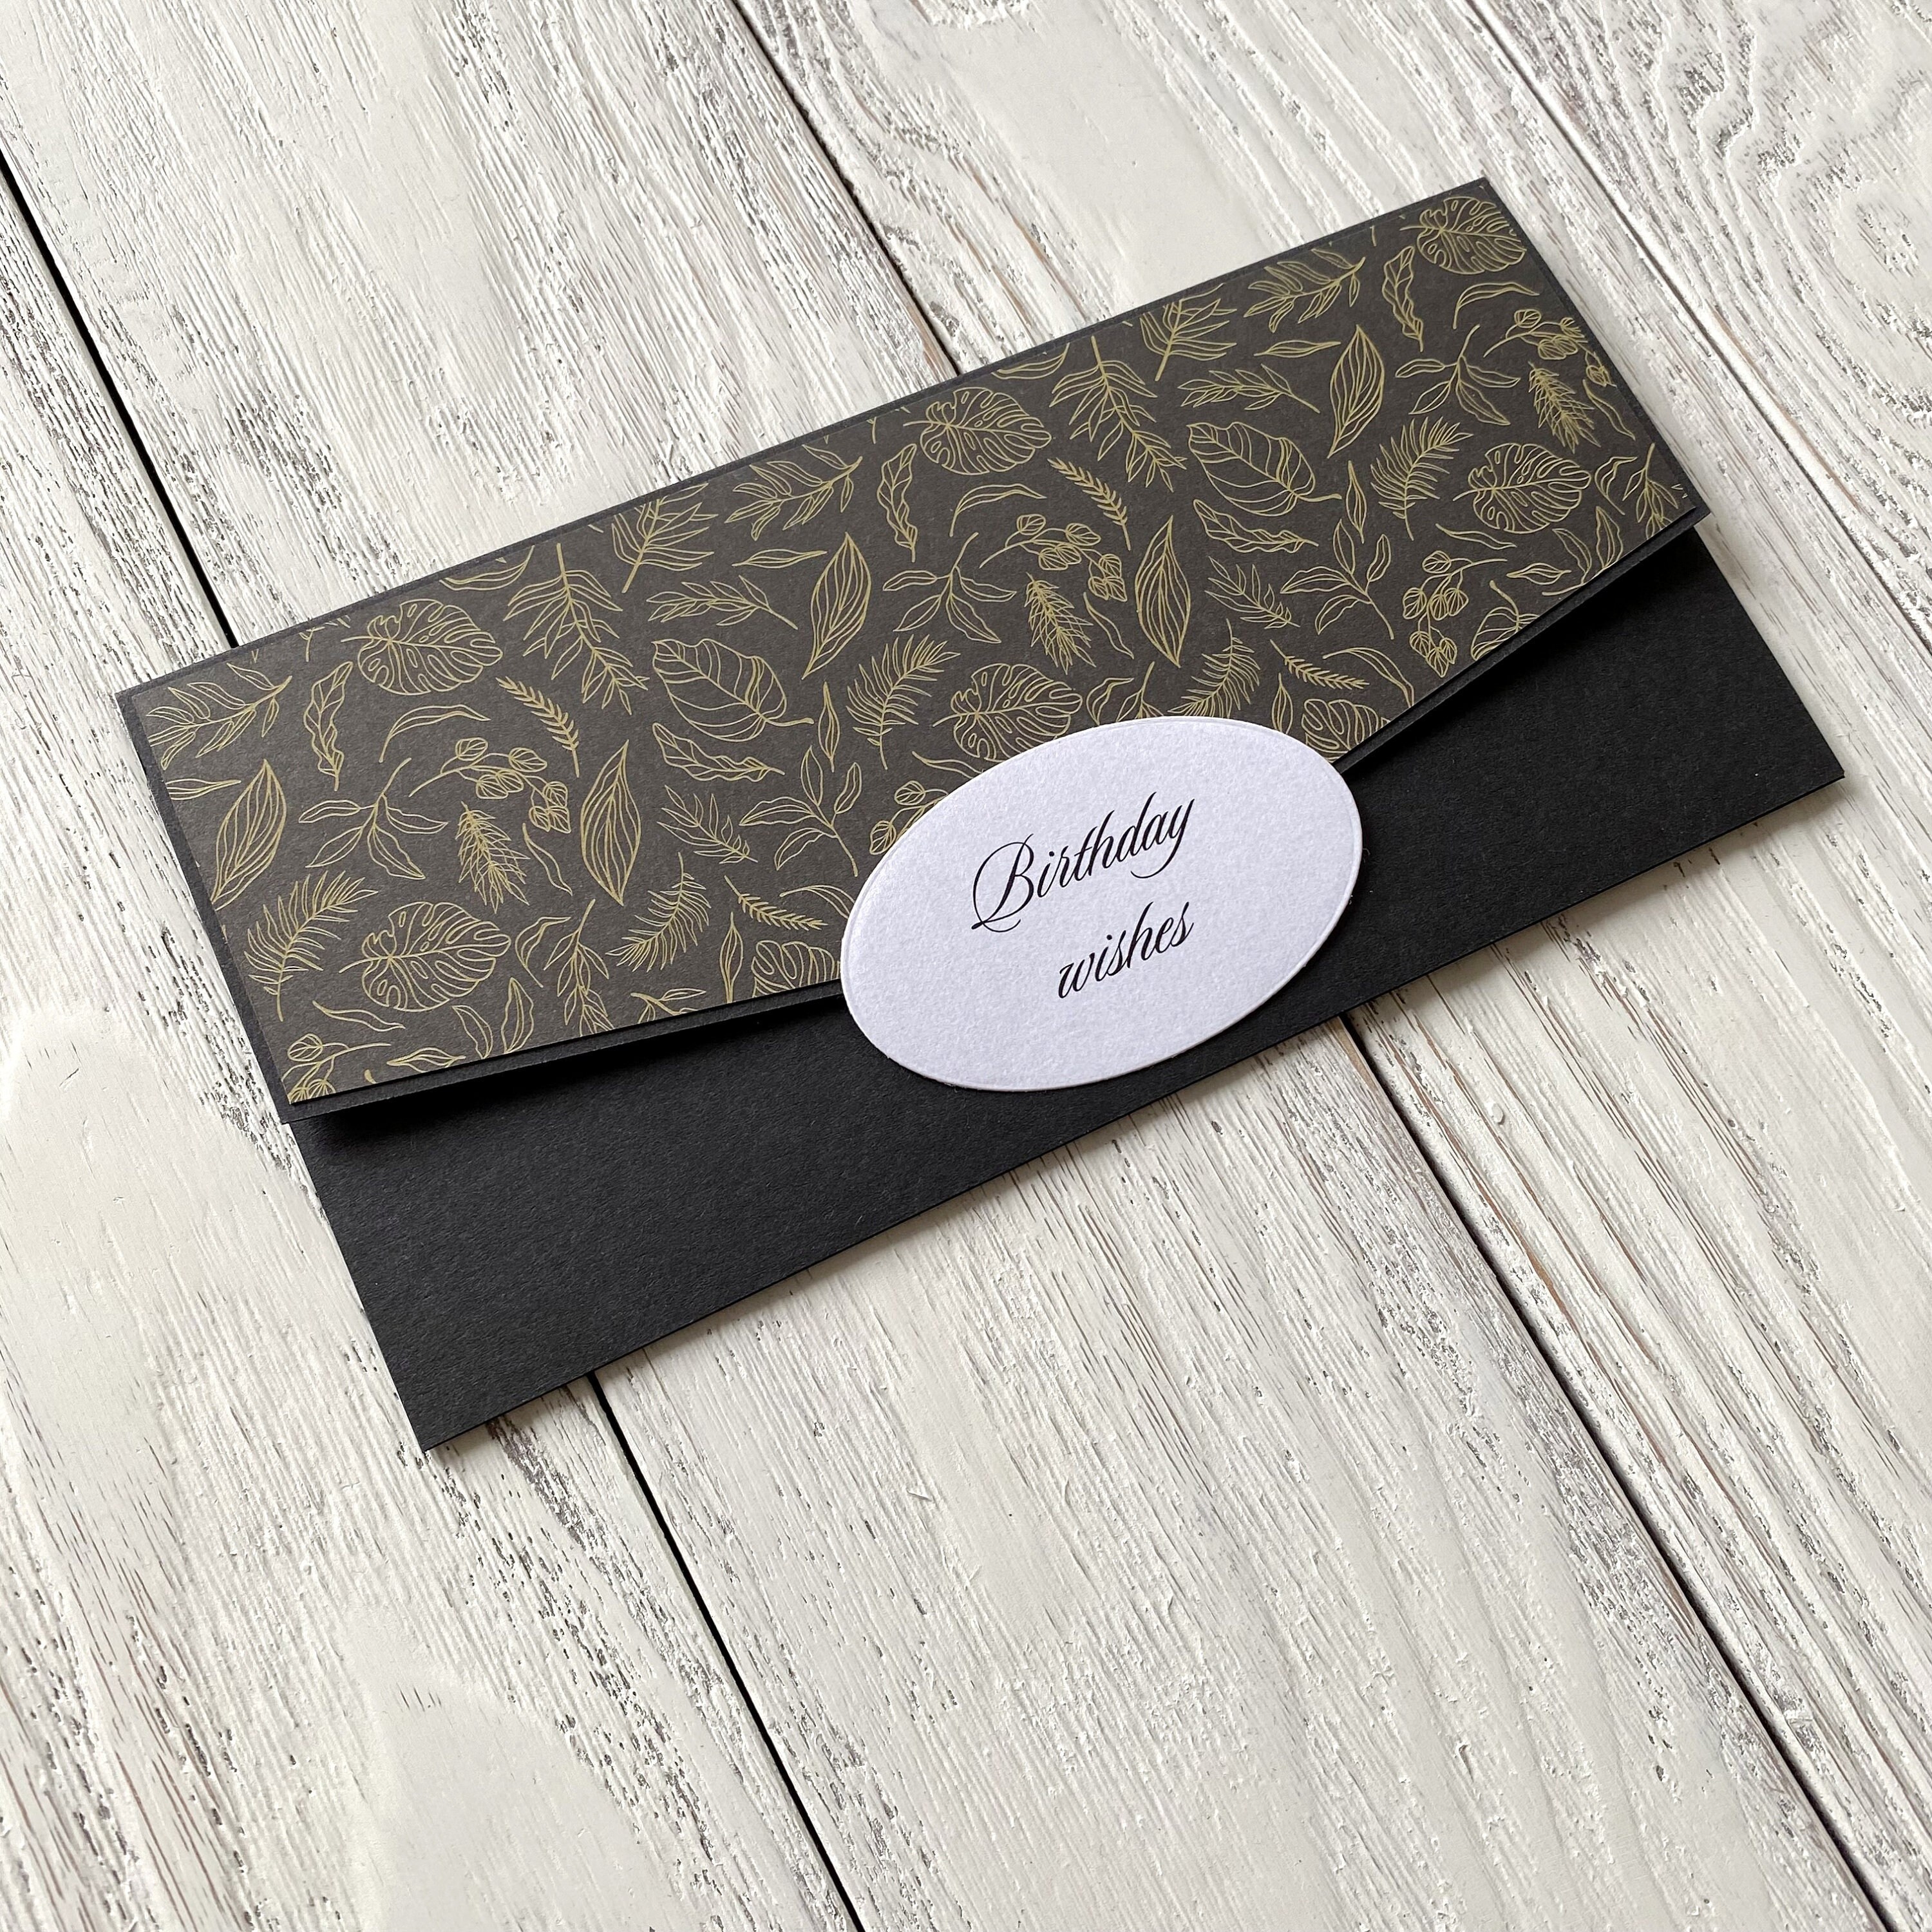 Jiebor 100 Sets Mini Black Envelopes with Small Blank Gift Business Card  Wedding